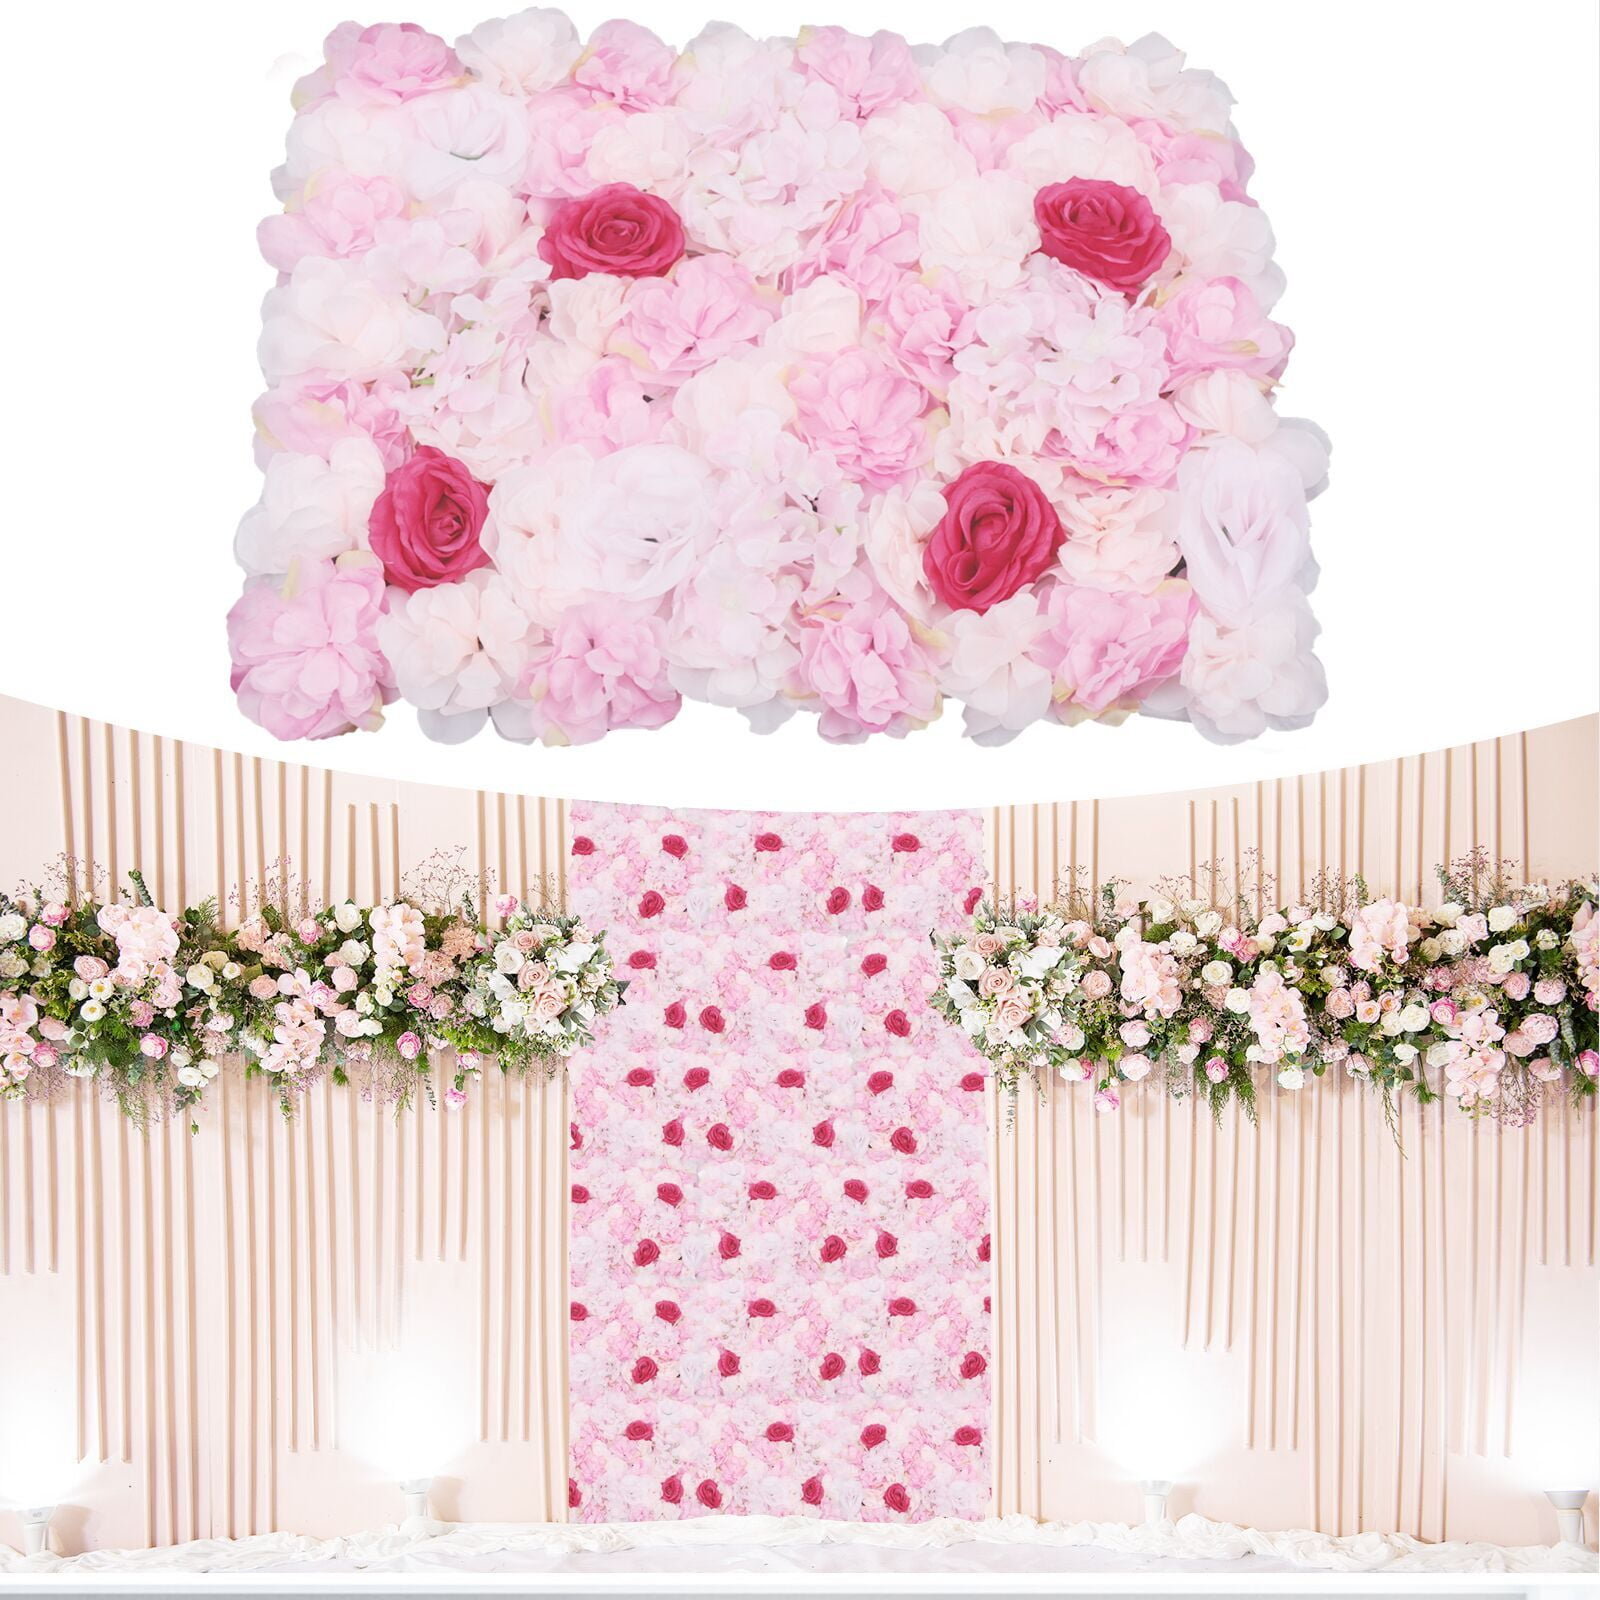 4x Artificial Silk Flower Wall Panels Wedding Backdrop Decor Pink and White 